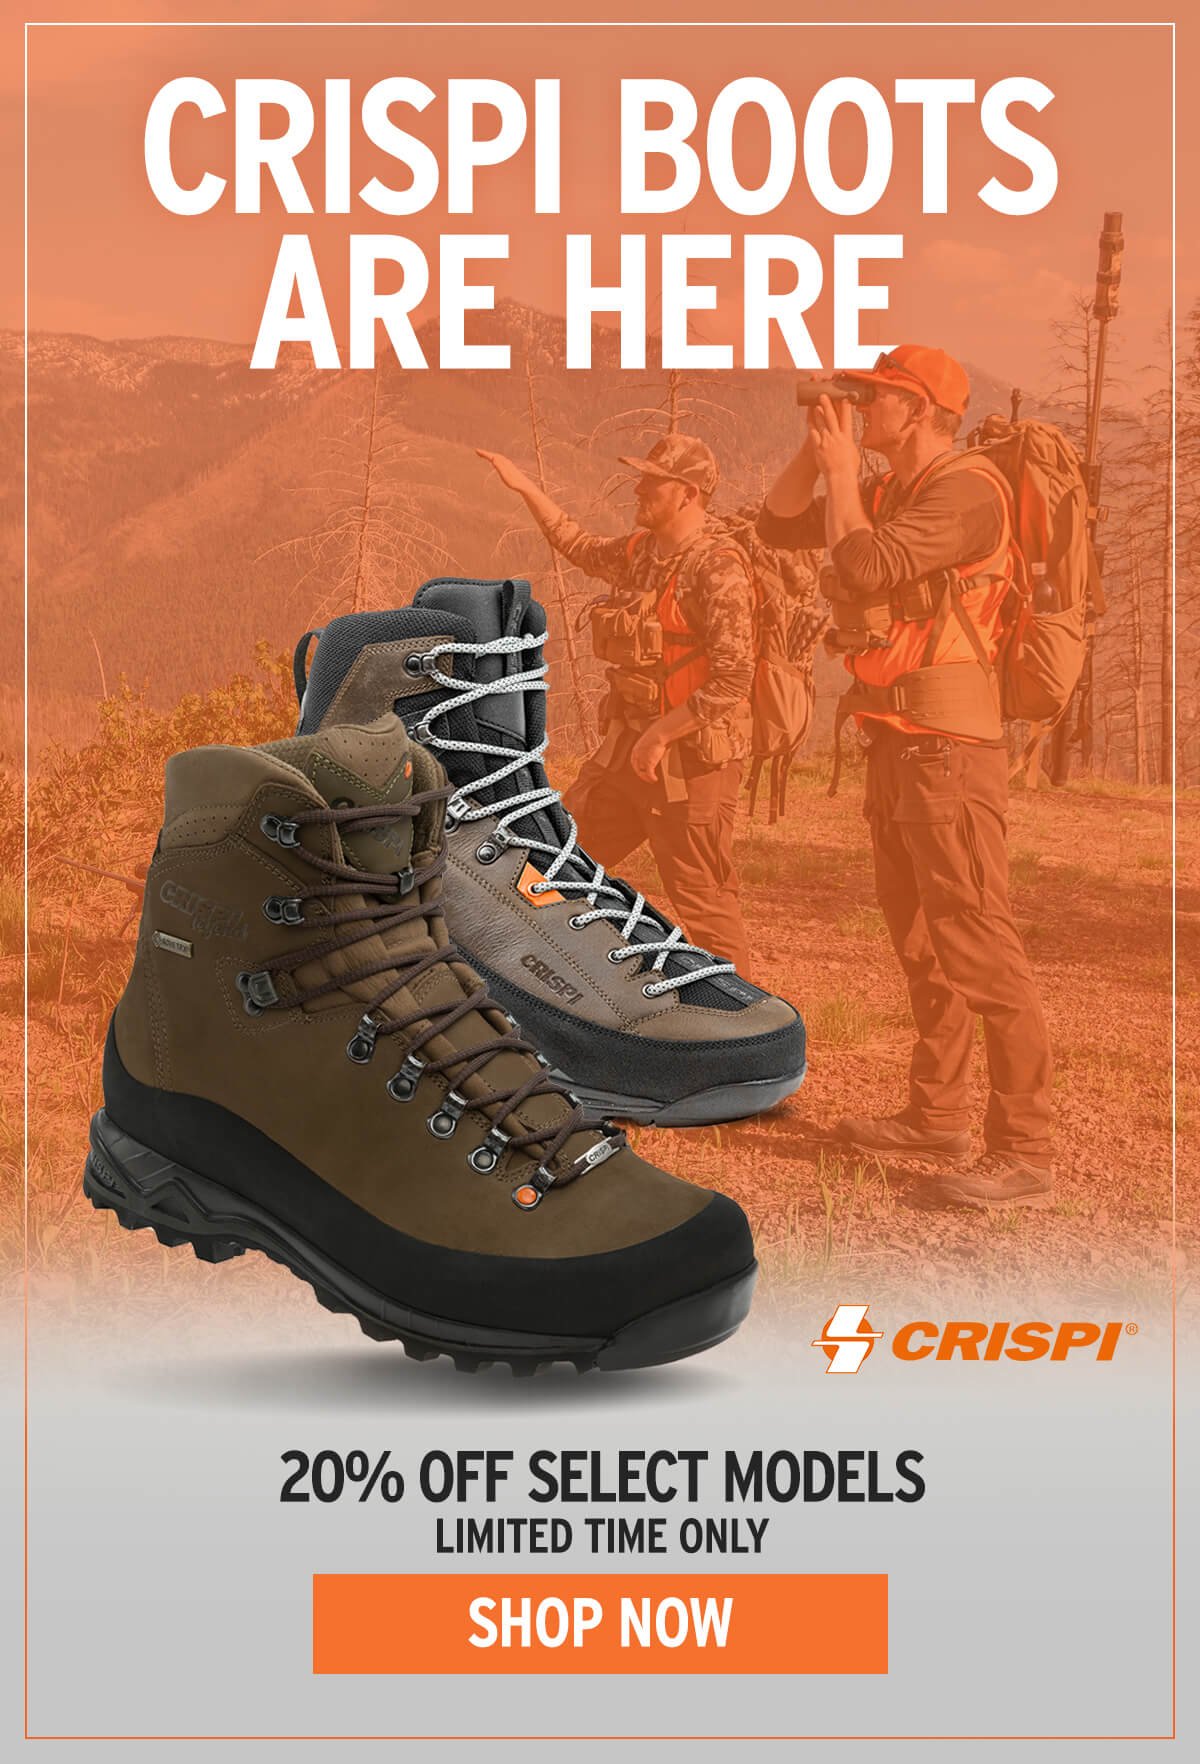 MeatEater: New in Store: Crispi Boots